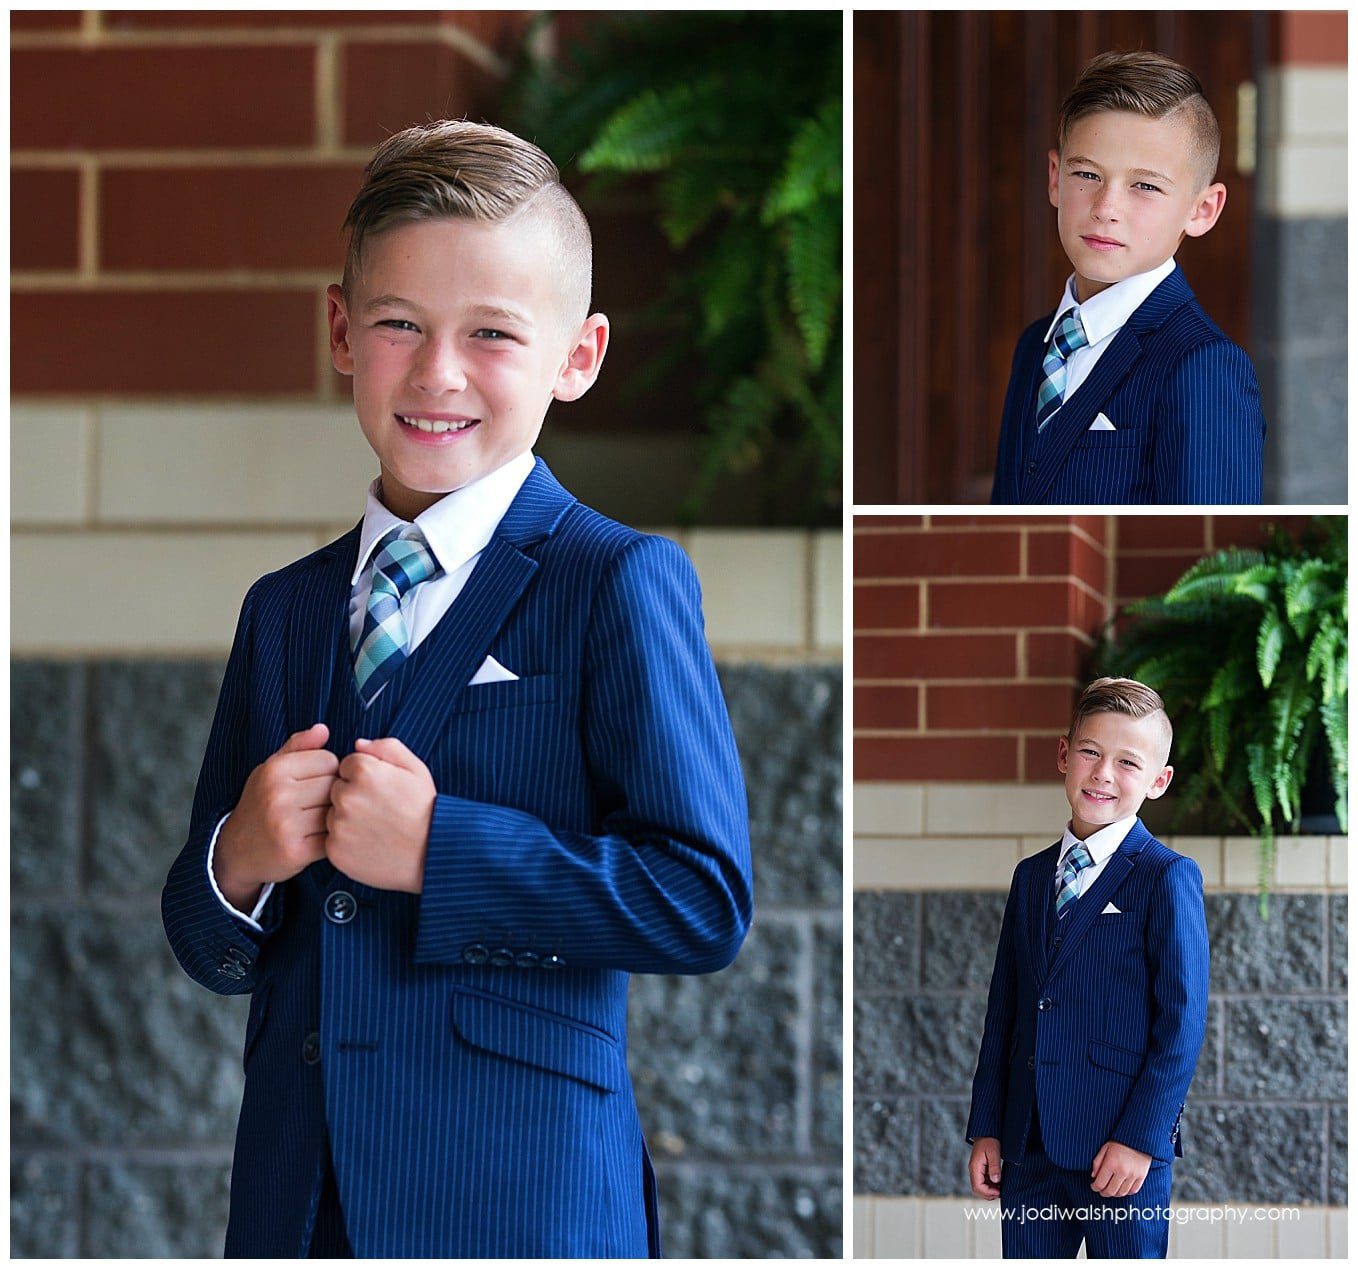 collage of images of a young boy wearing a blue suit for his first holy communion